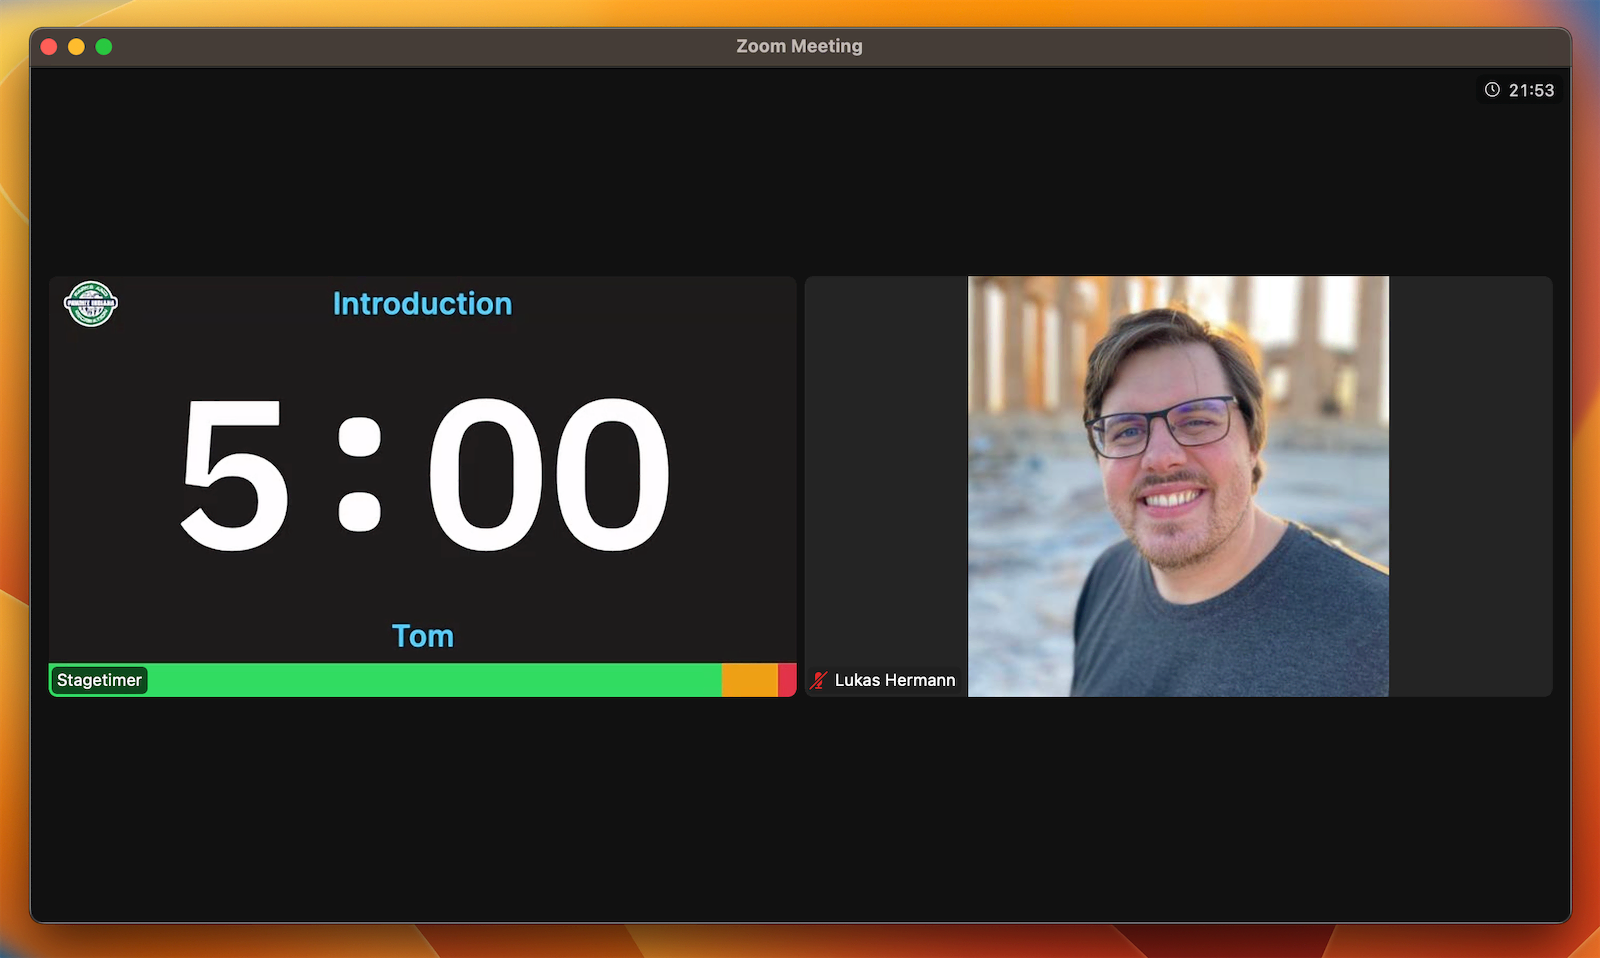 Stagetimer in your Zoom call